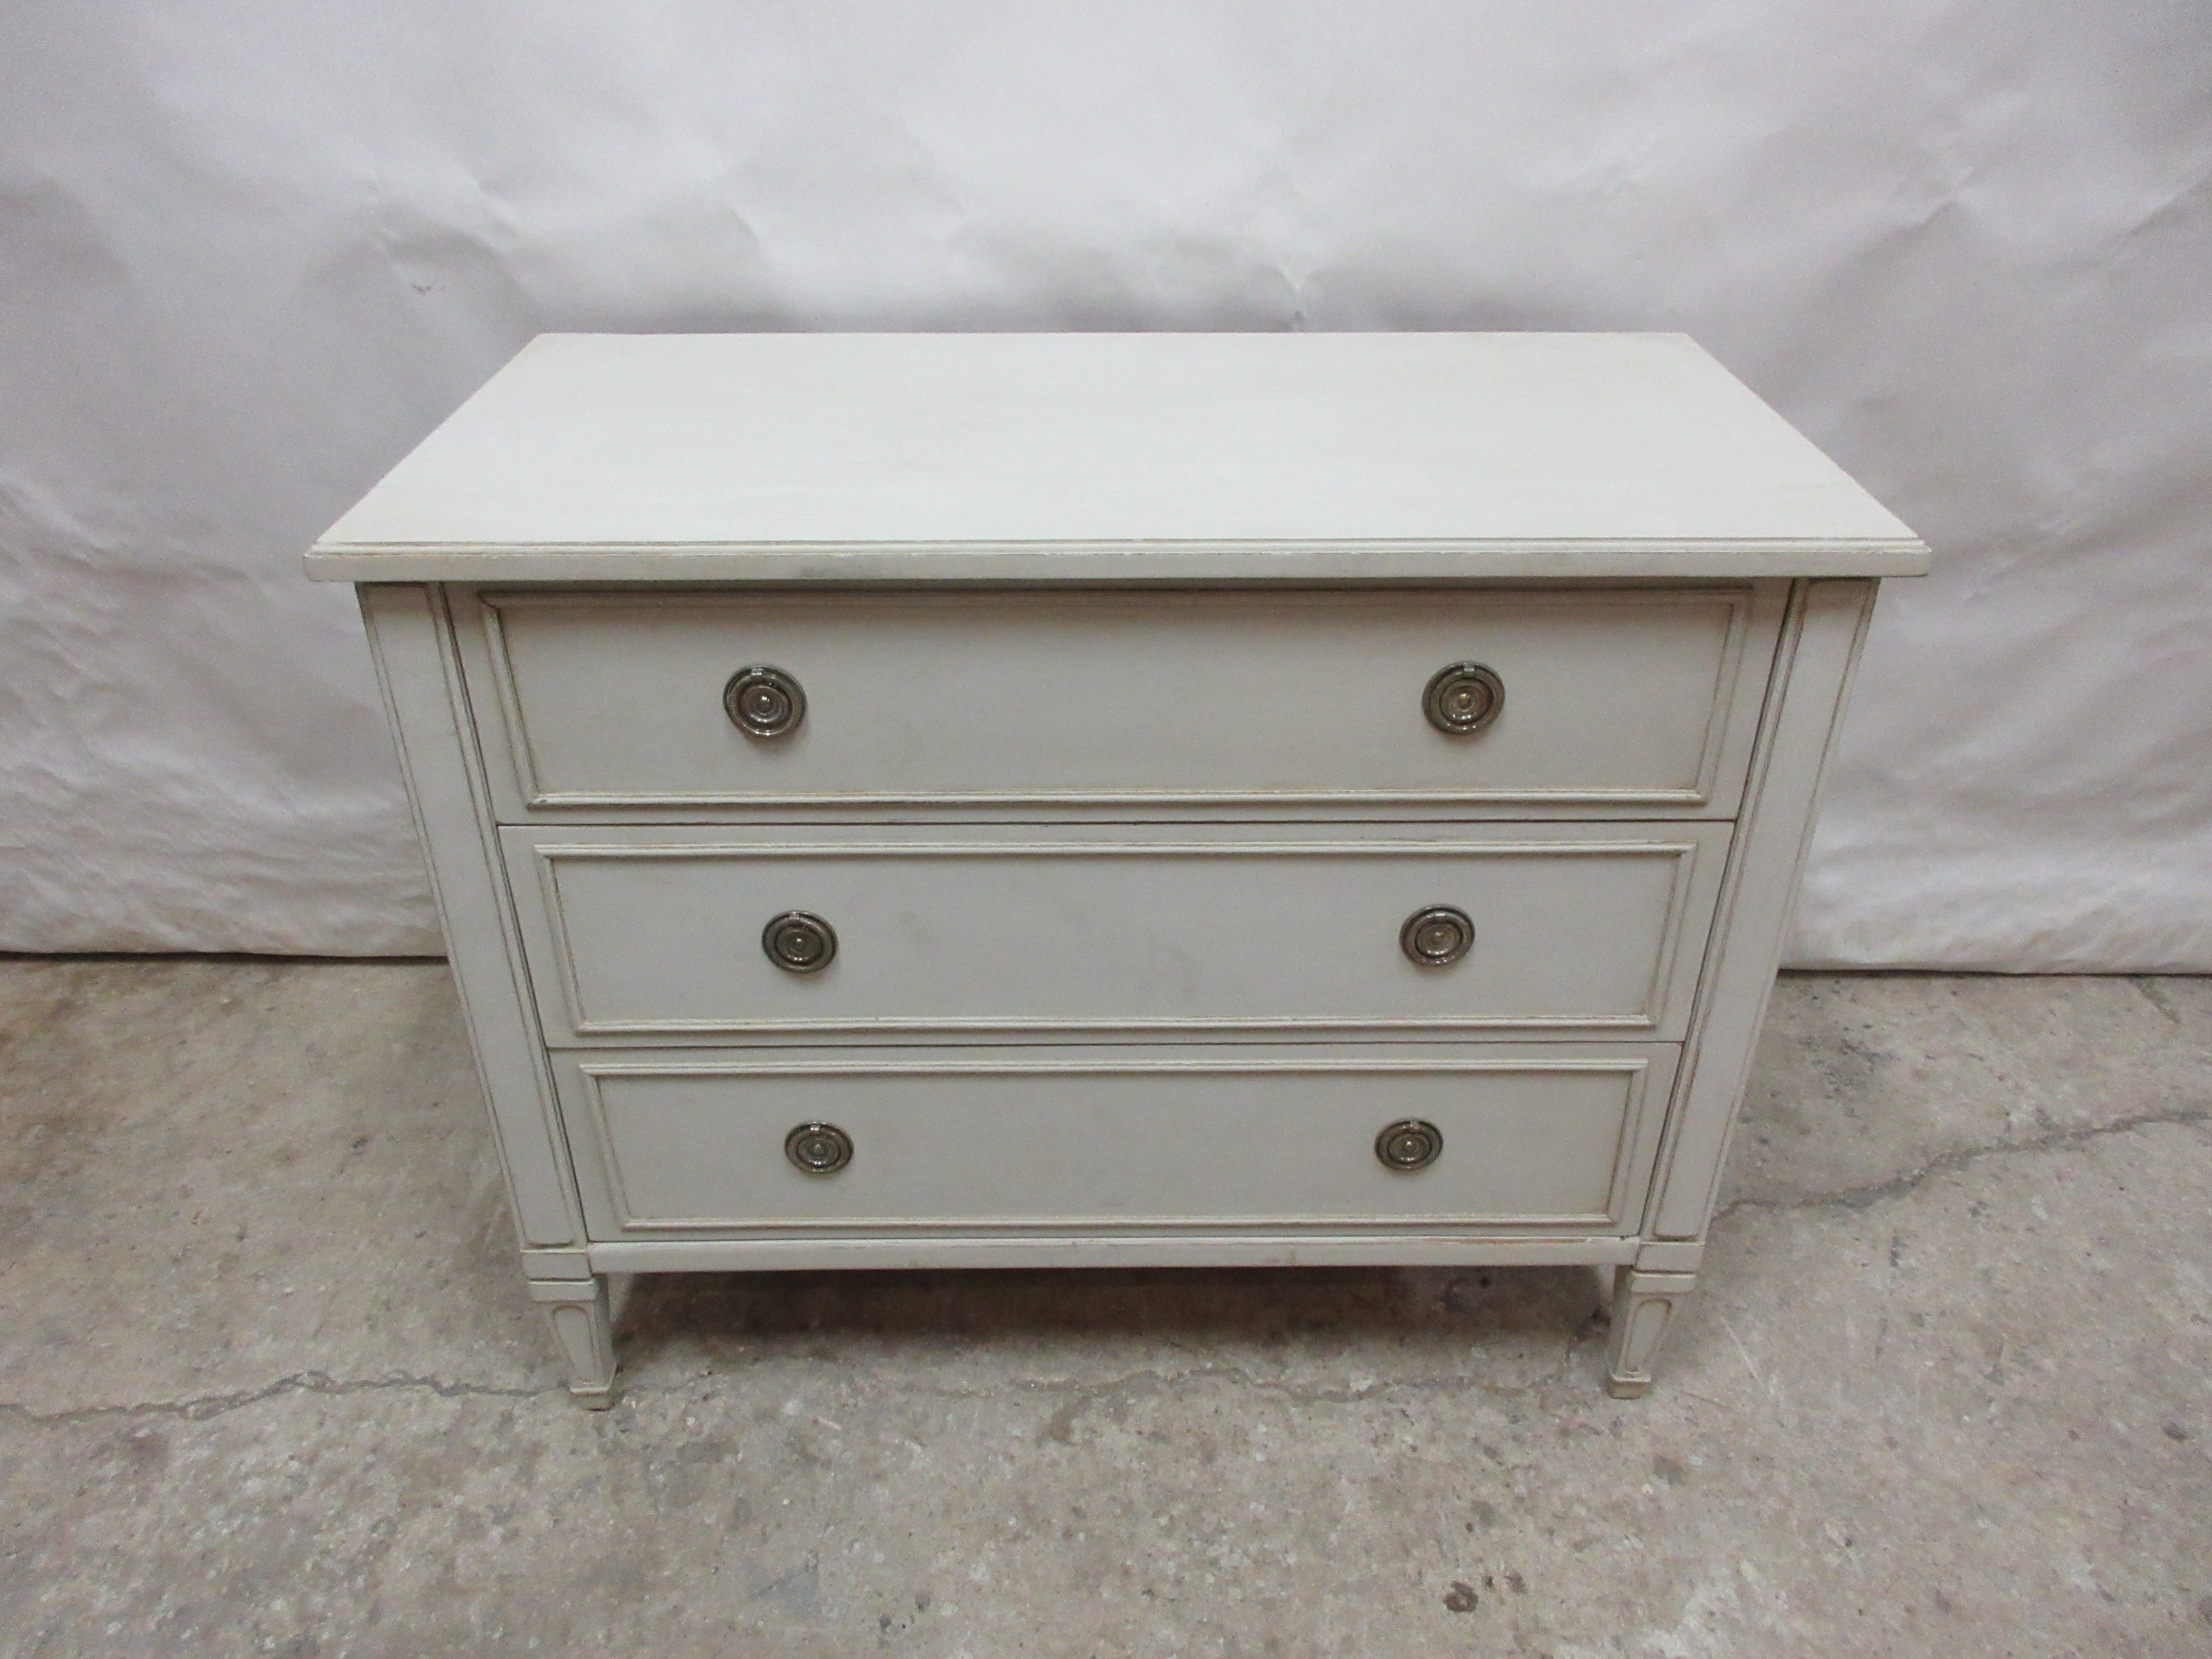 This is a Gustavian style 3 drawer chest, its been restored and repainted with Milk Paints 